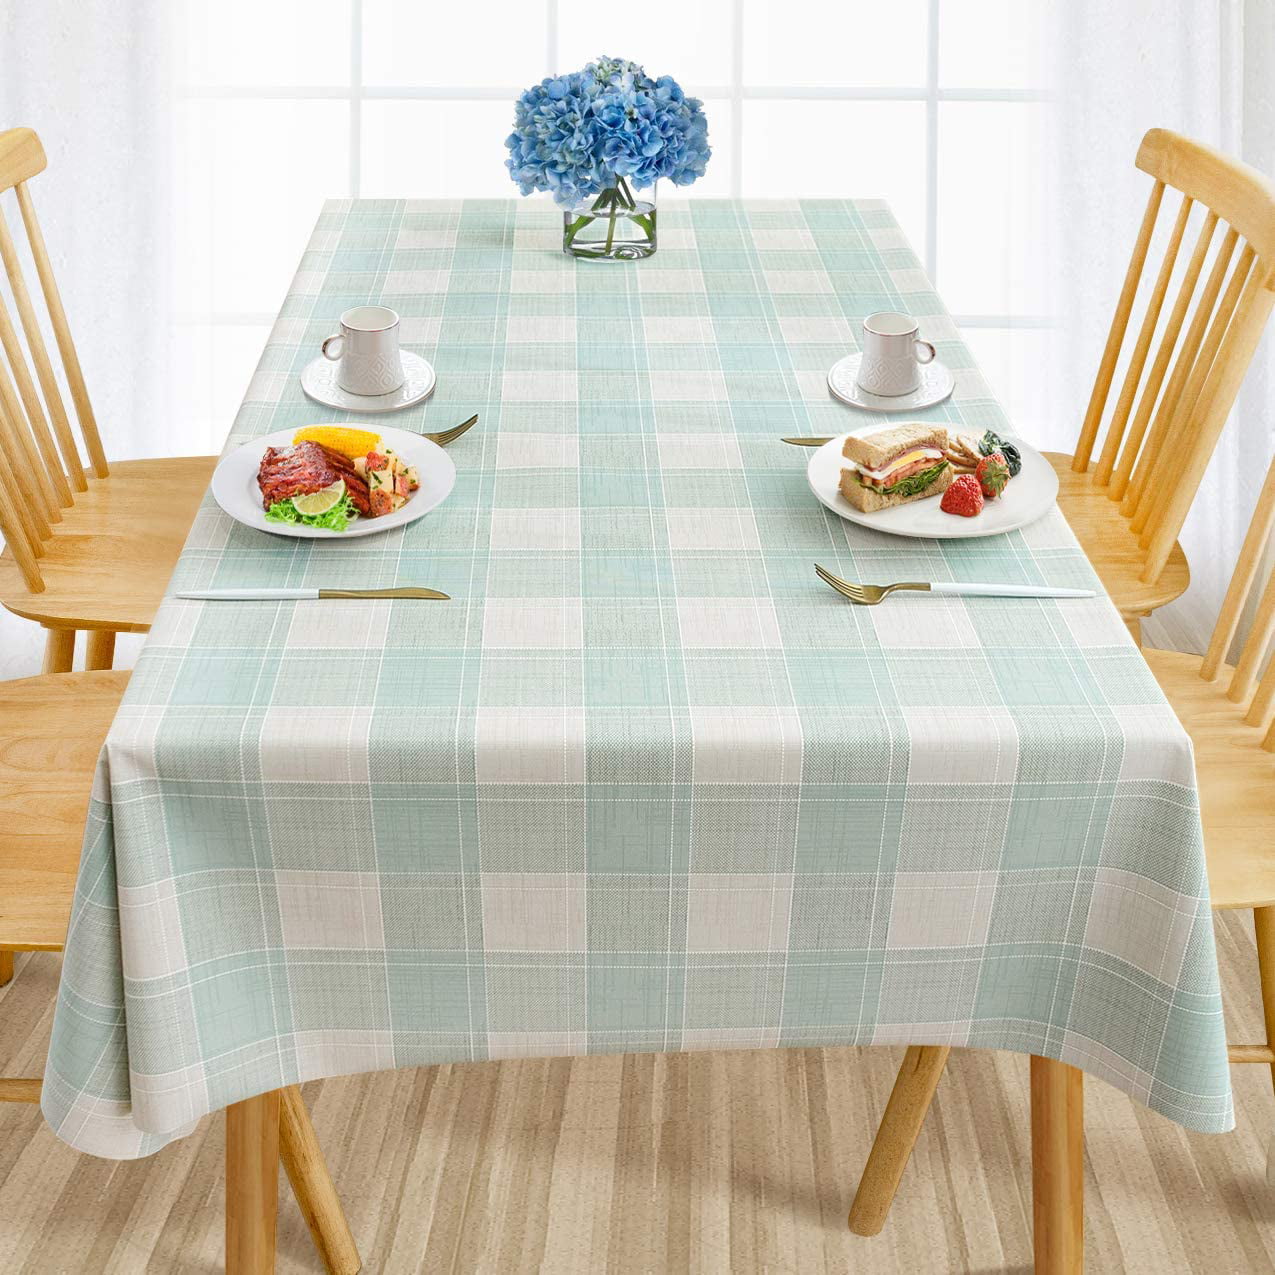 2 WORDERFUL Tablecloths For Rectangle Tables Heavy Duty Wipe Clean PU Tablecloths Oil-proof Waterproof Stain-resistant Table Cover 